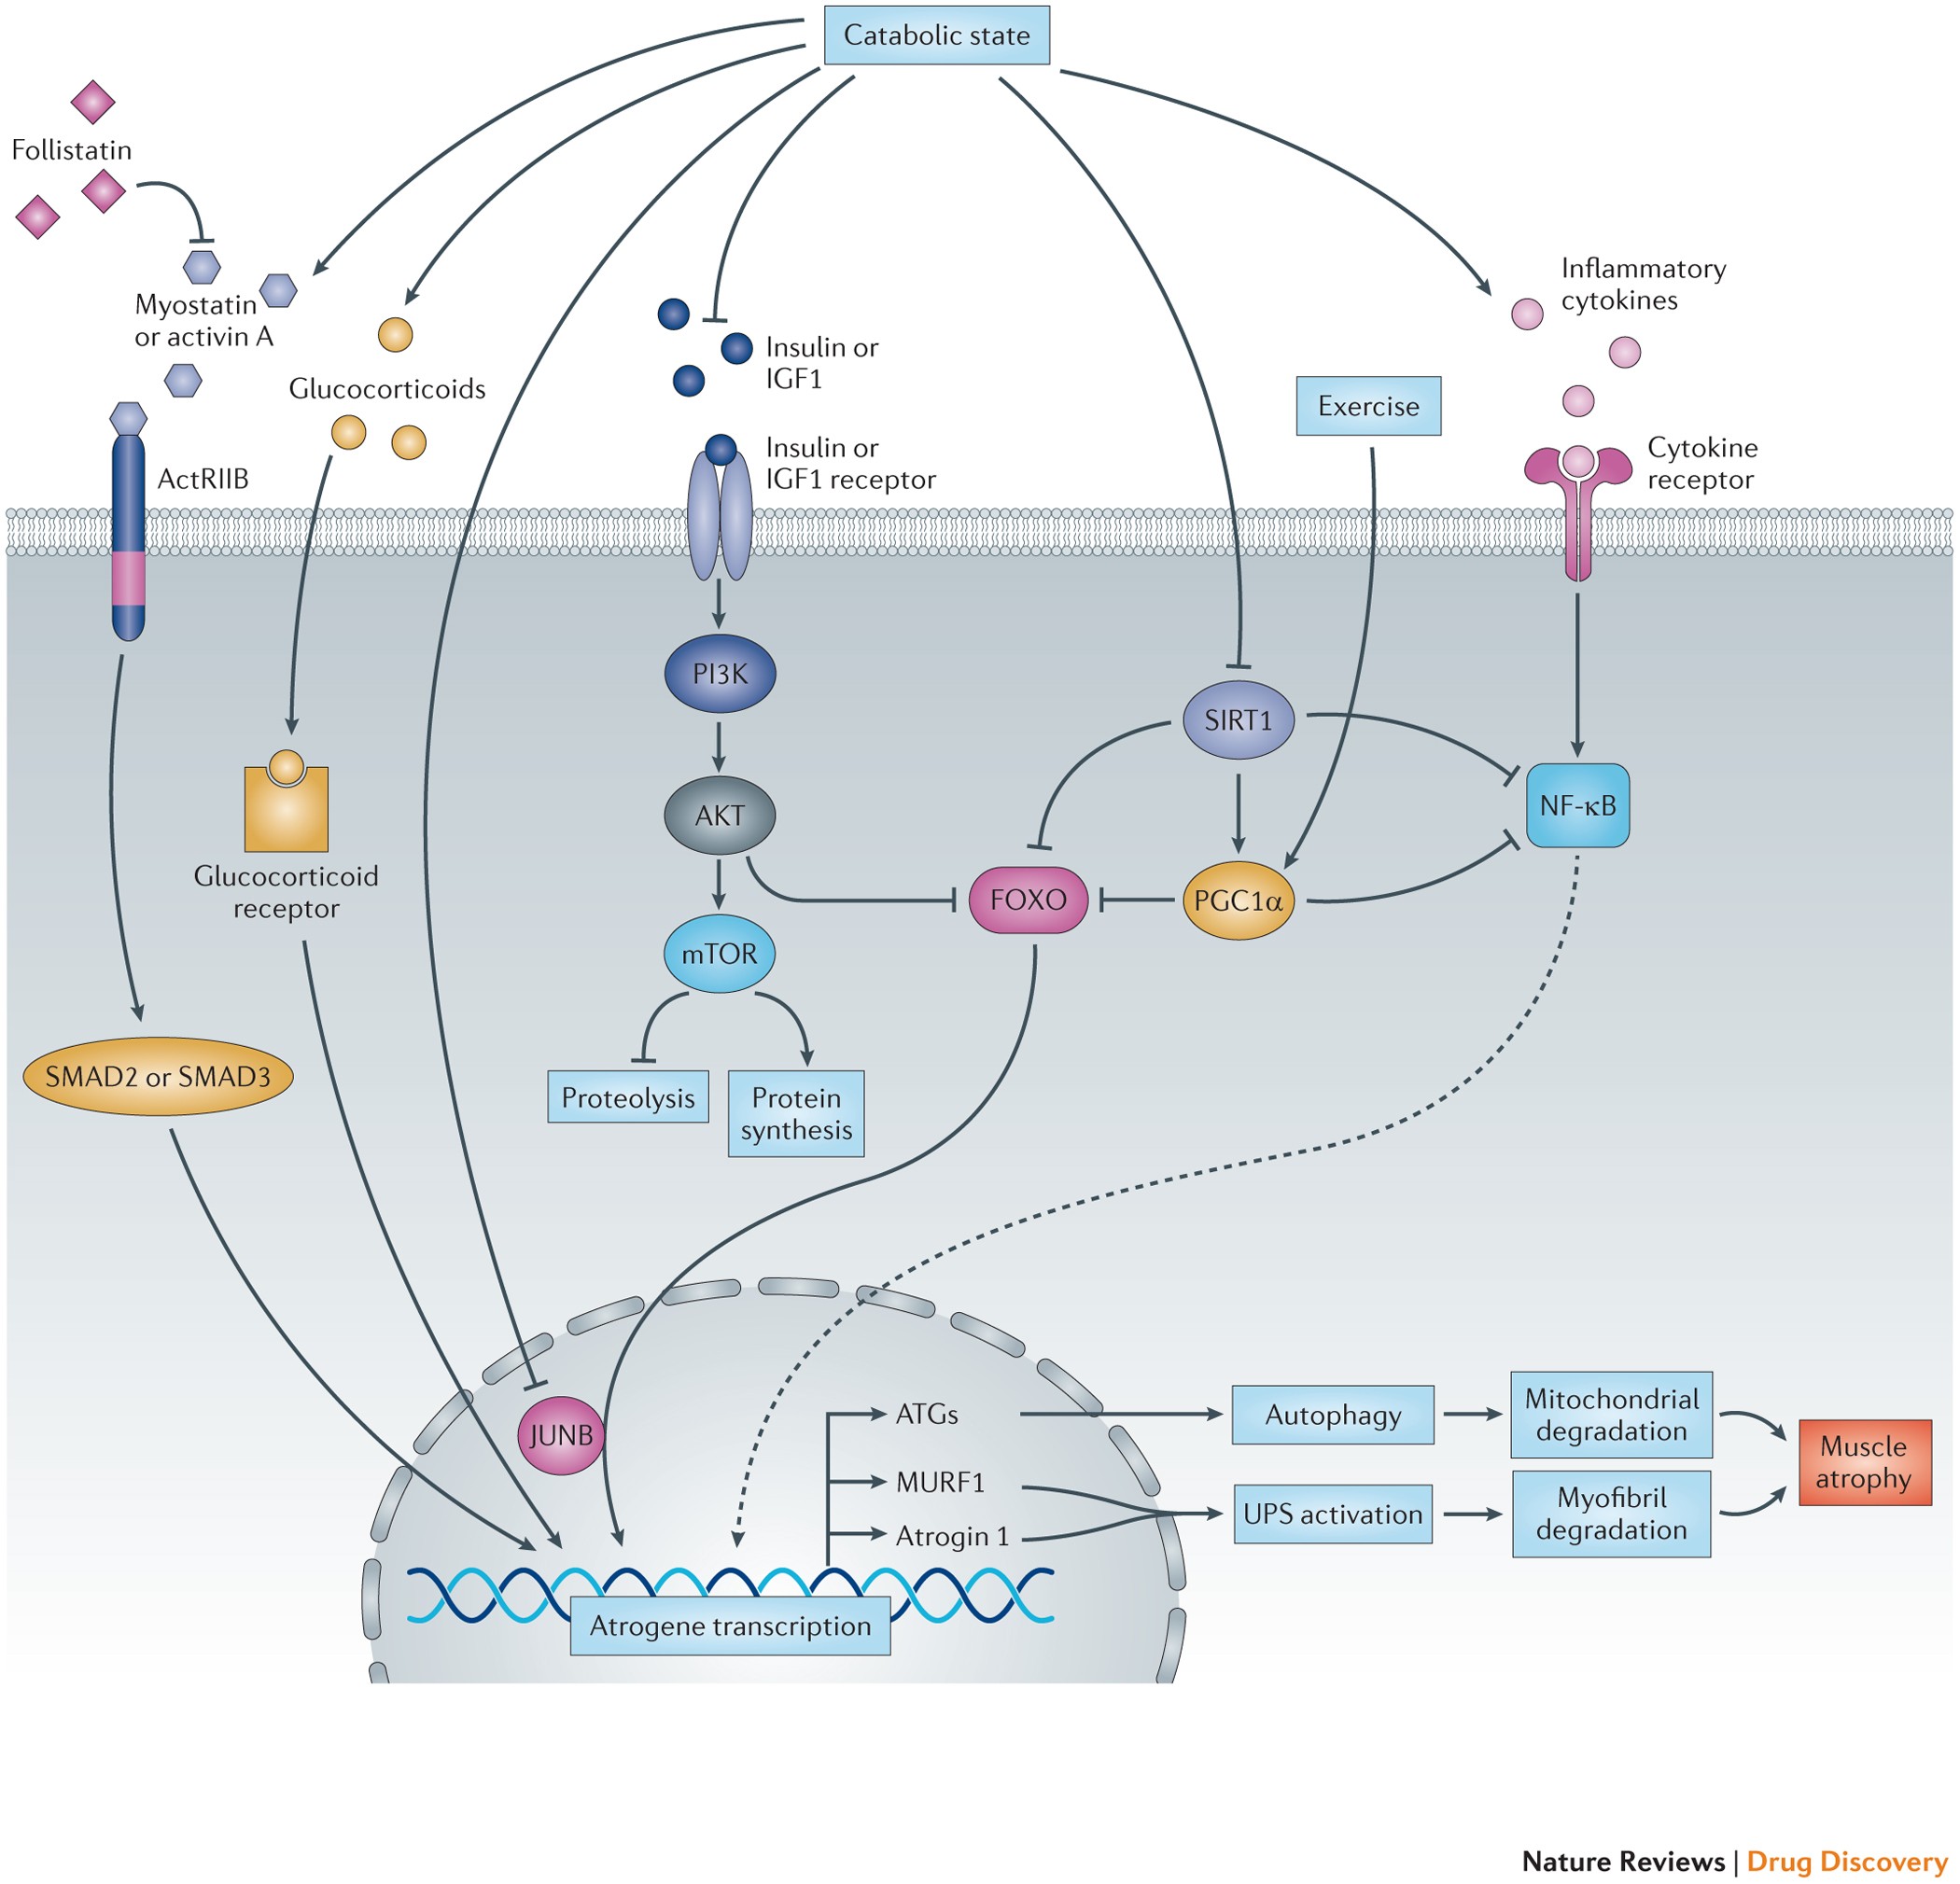 Muscle wasting in disease: molecular mechanisms and promising therapies |  Nature Reviews Drug Discovery